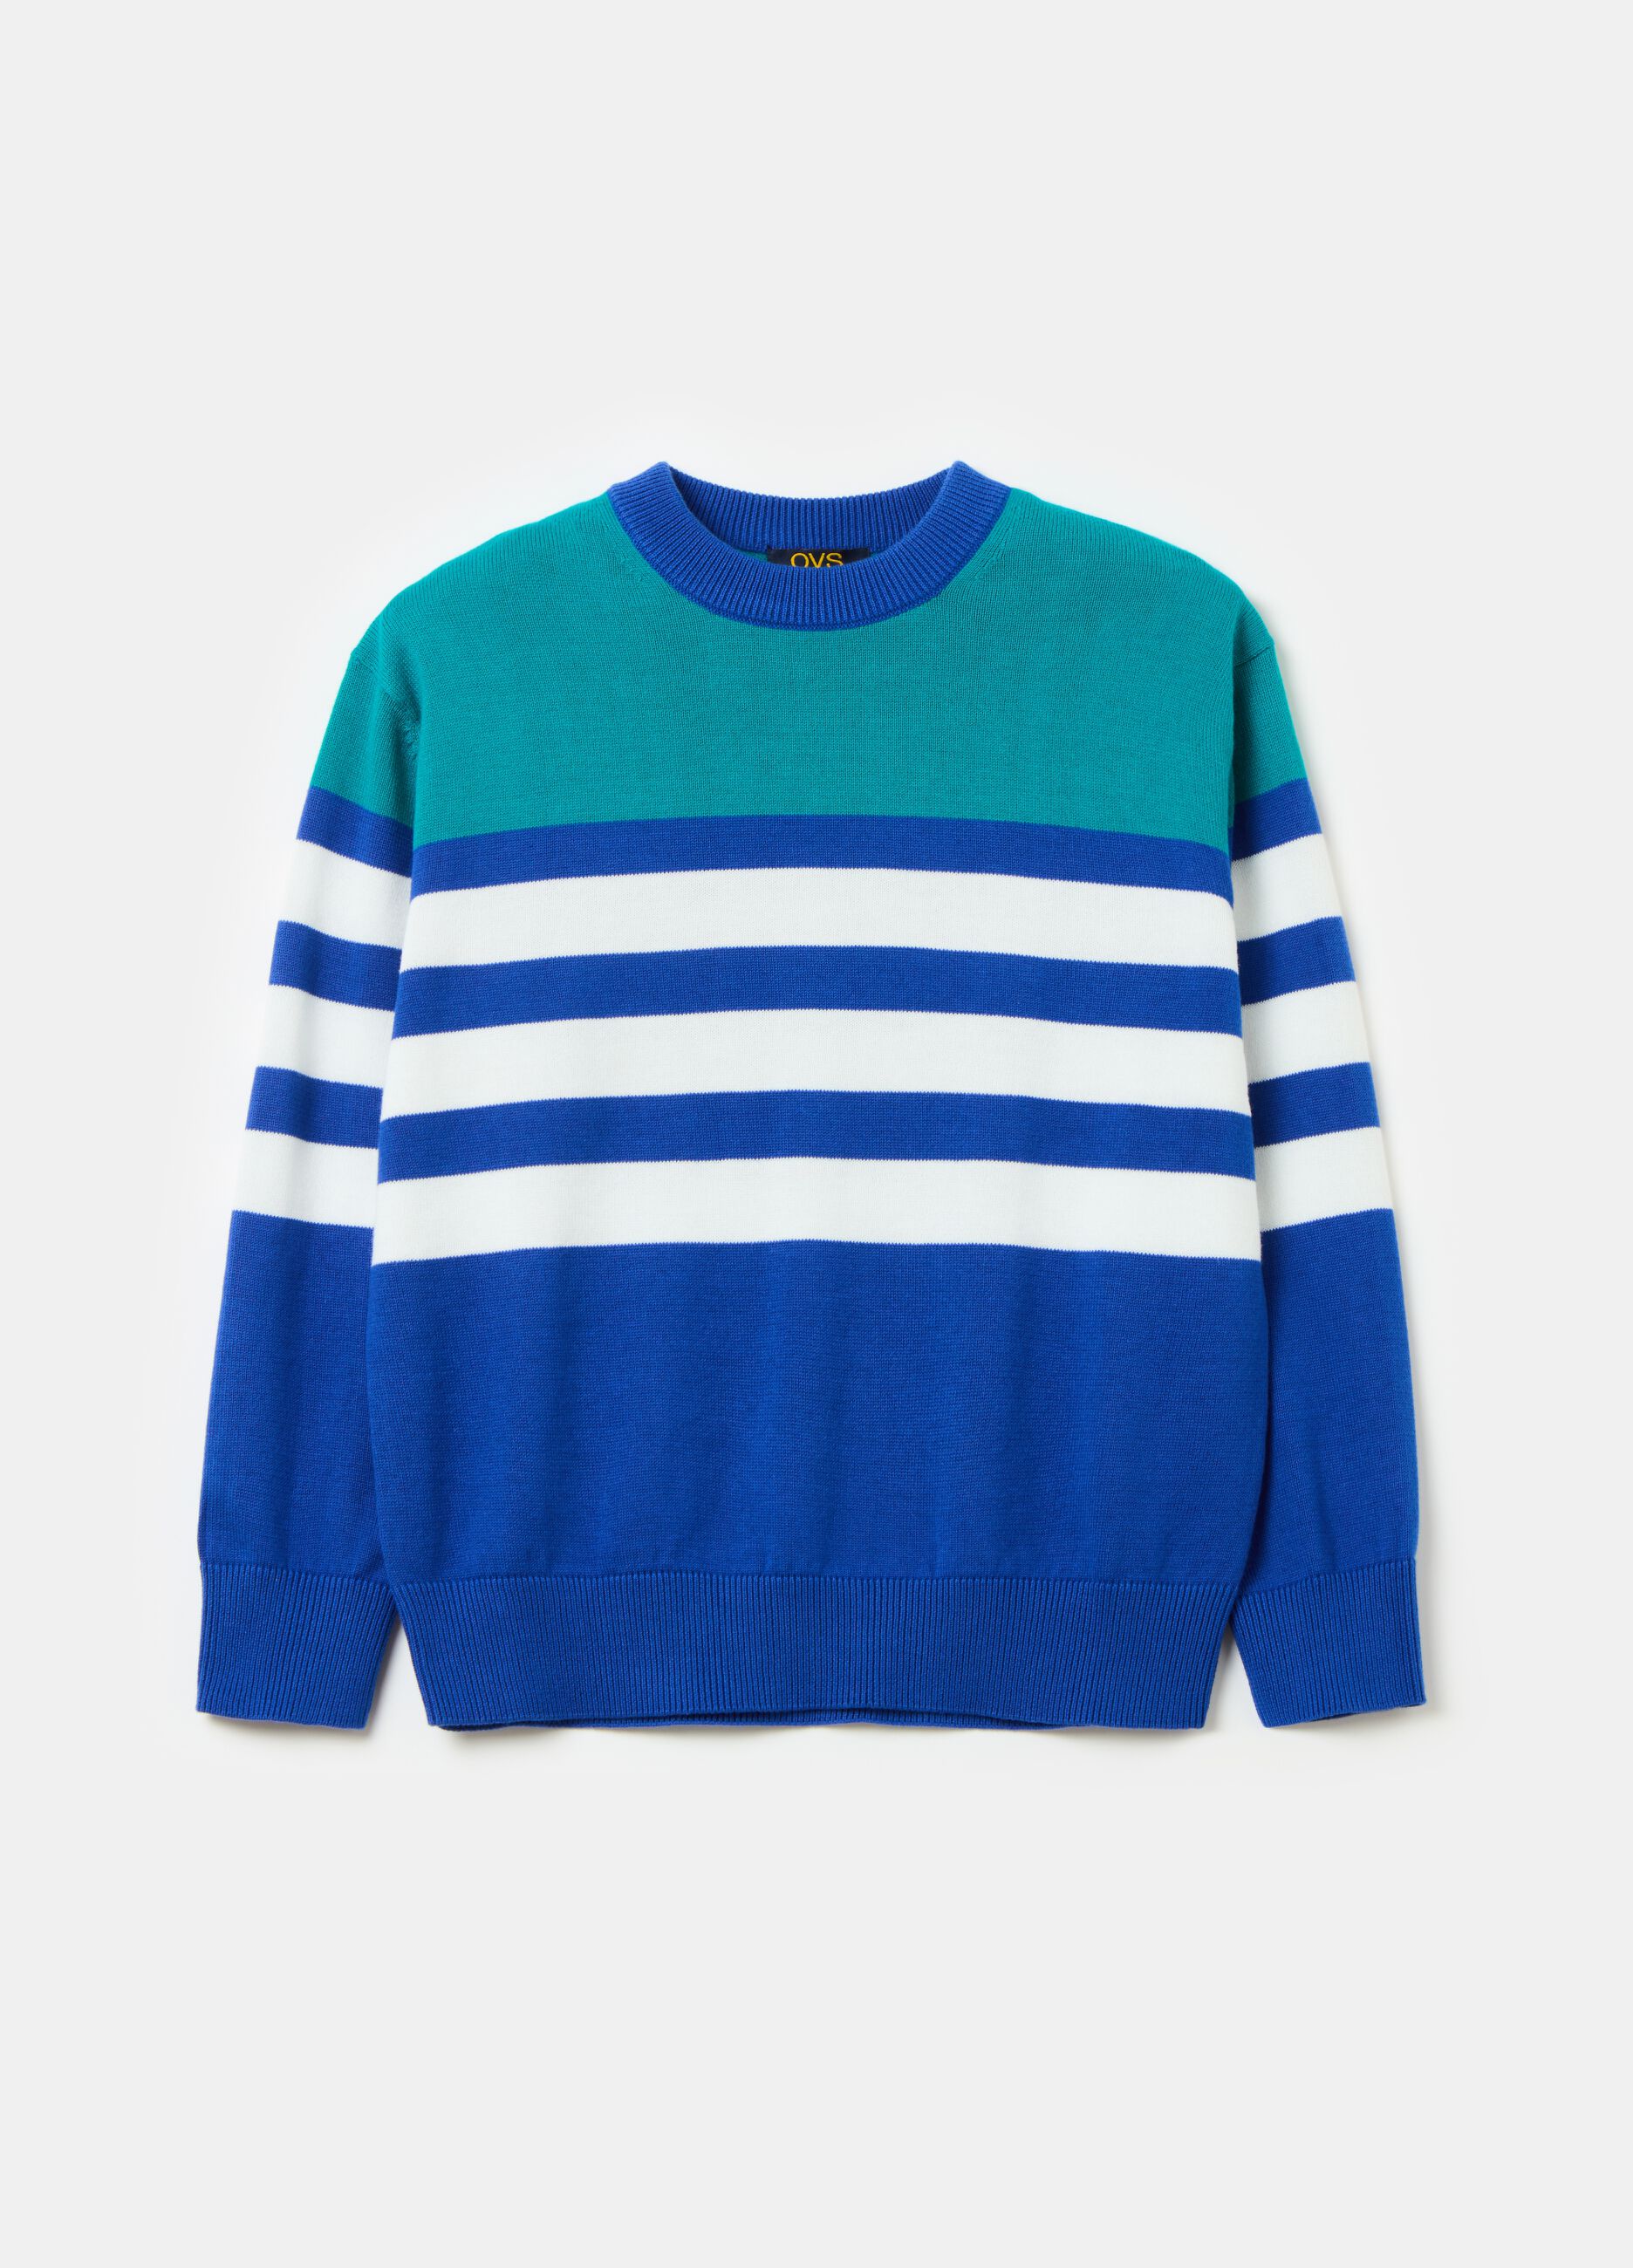 Pullover with round neck and striped design